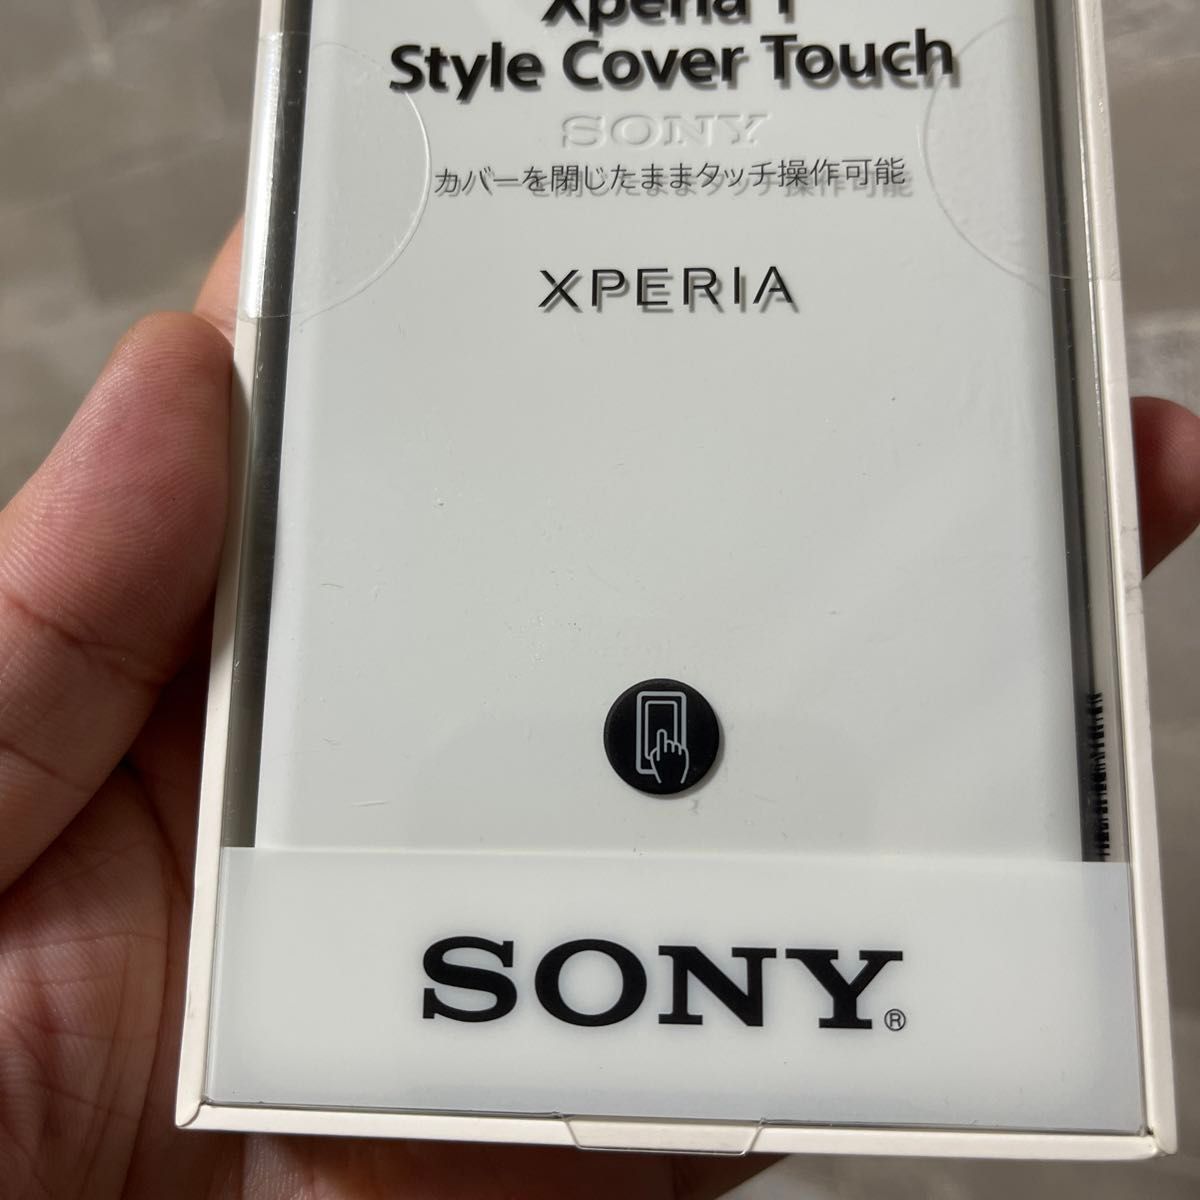 Xperia 1 Style Cover Touch SCTI30 ホワイト